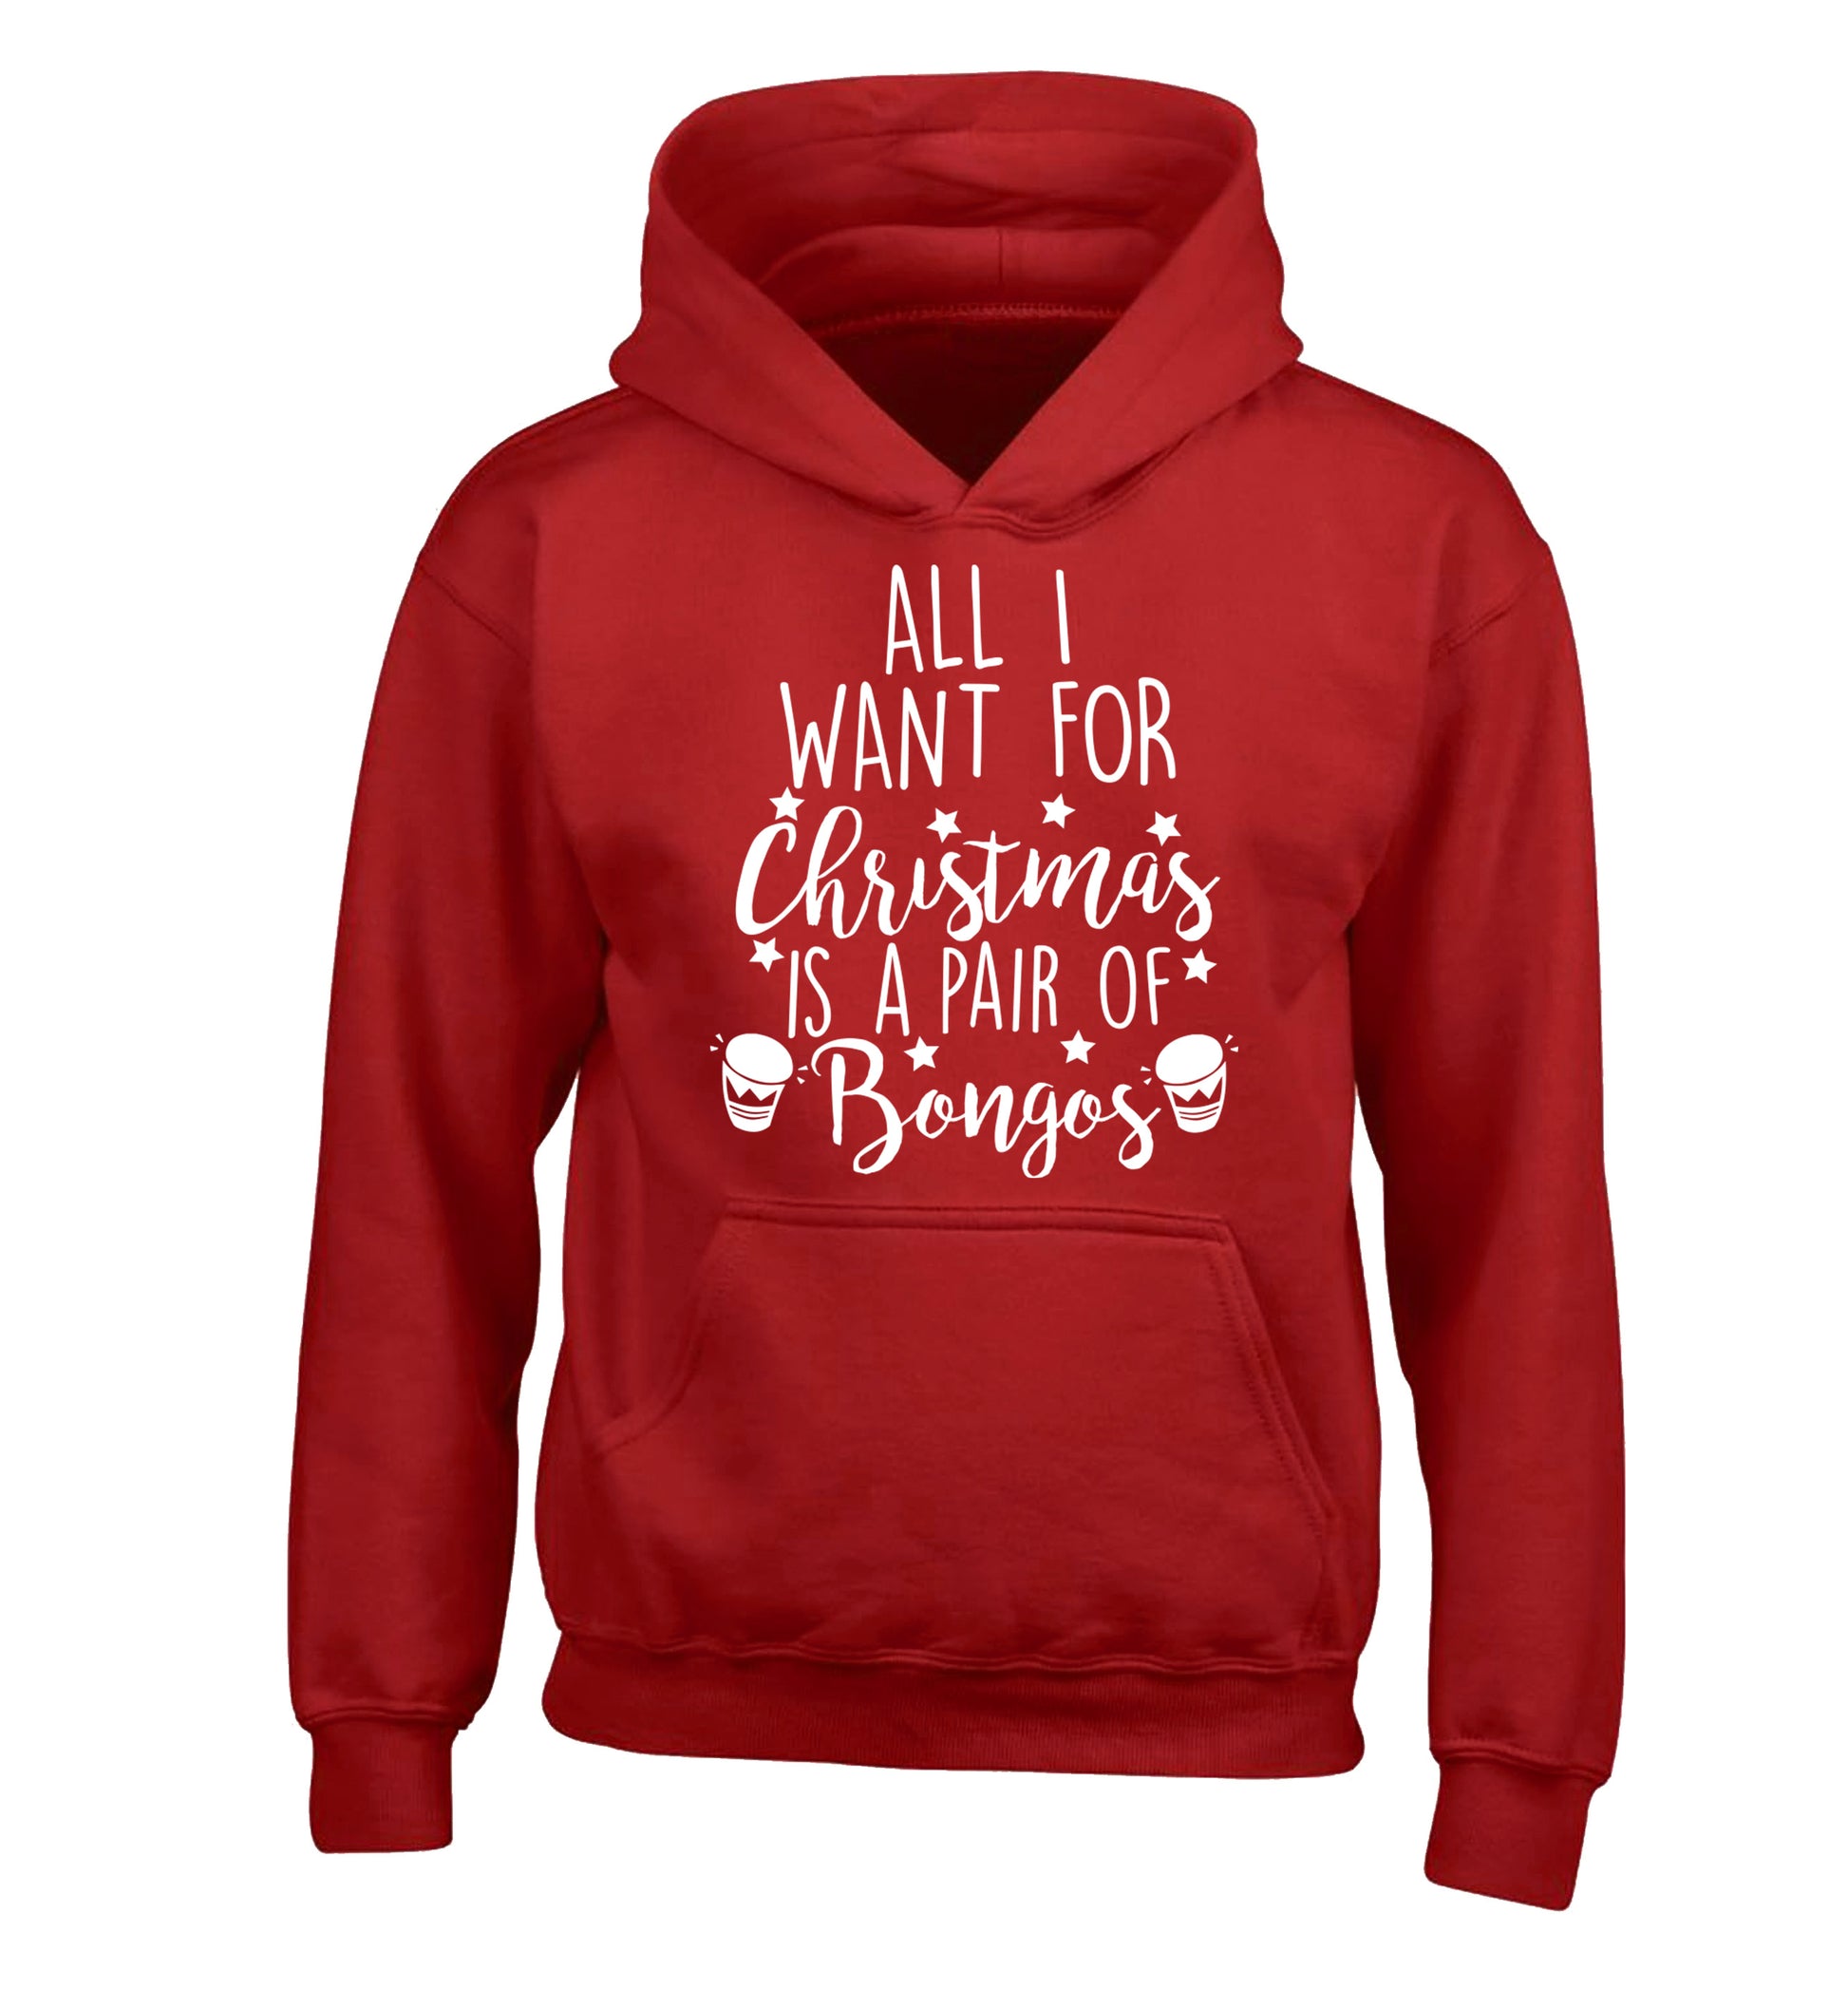 All I want for Christmas is a pair of bongos! children's red hoodie 12-14 Years